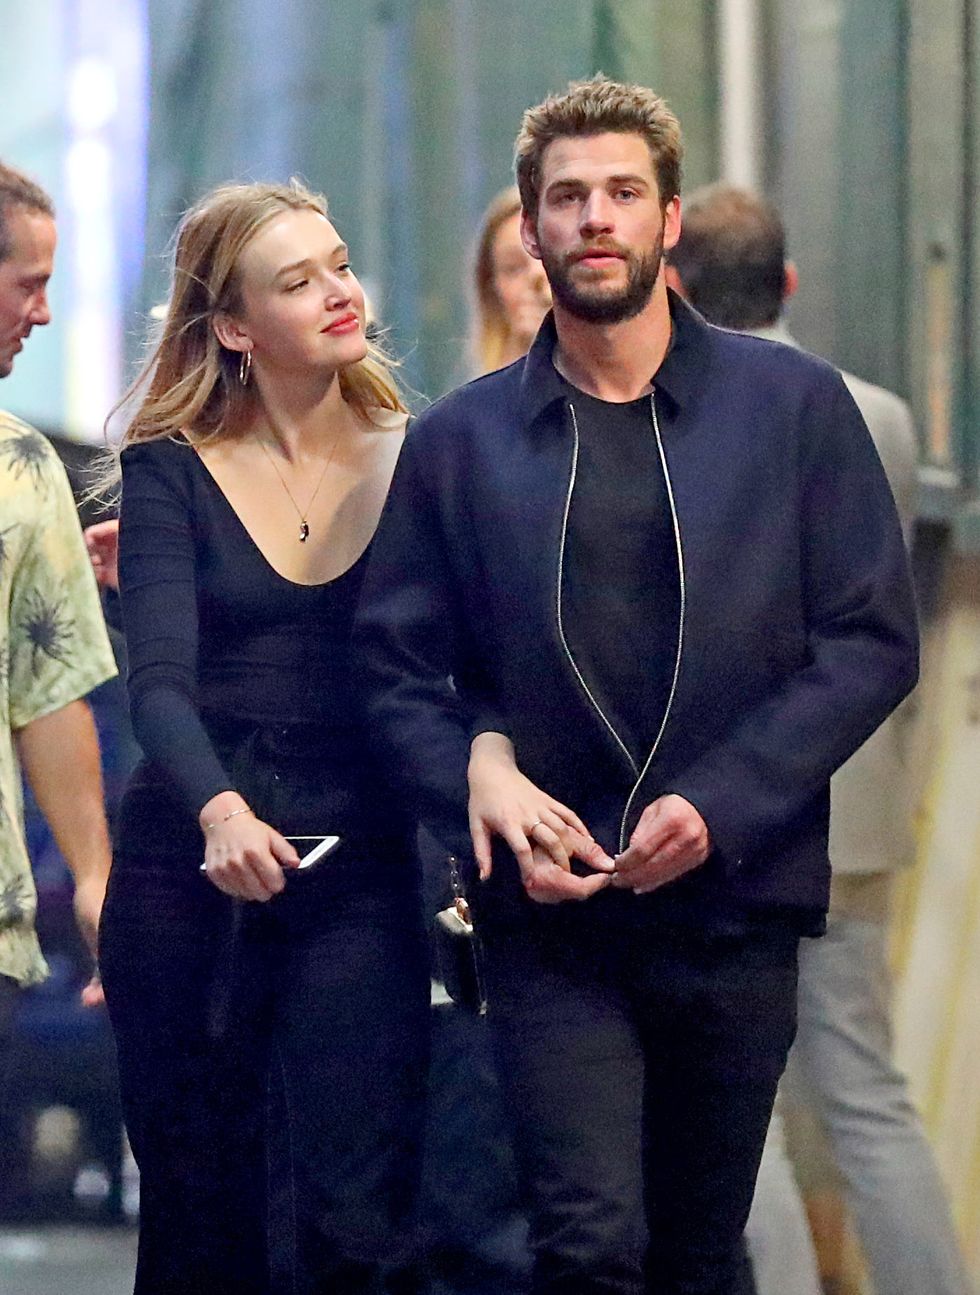 PREMIUM EXCLUSIVE: Liam Hemsworth and New Flame Maddison Brown Share a Passionate Kiss in New York City.